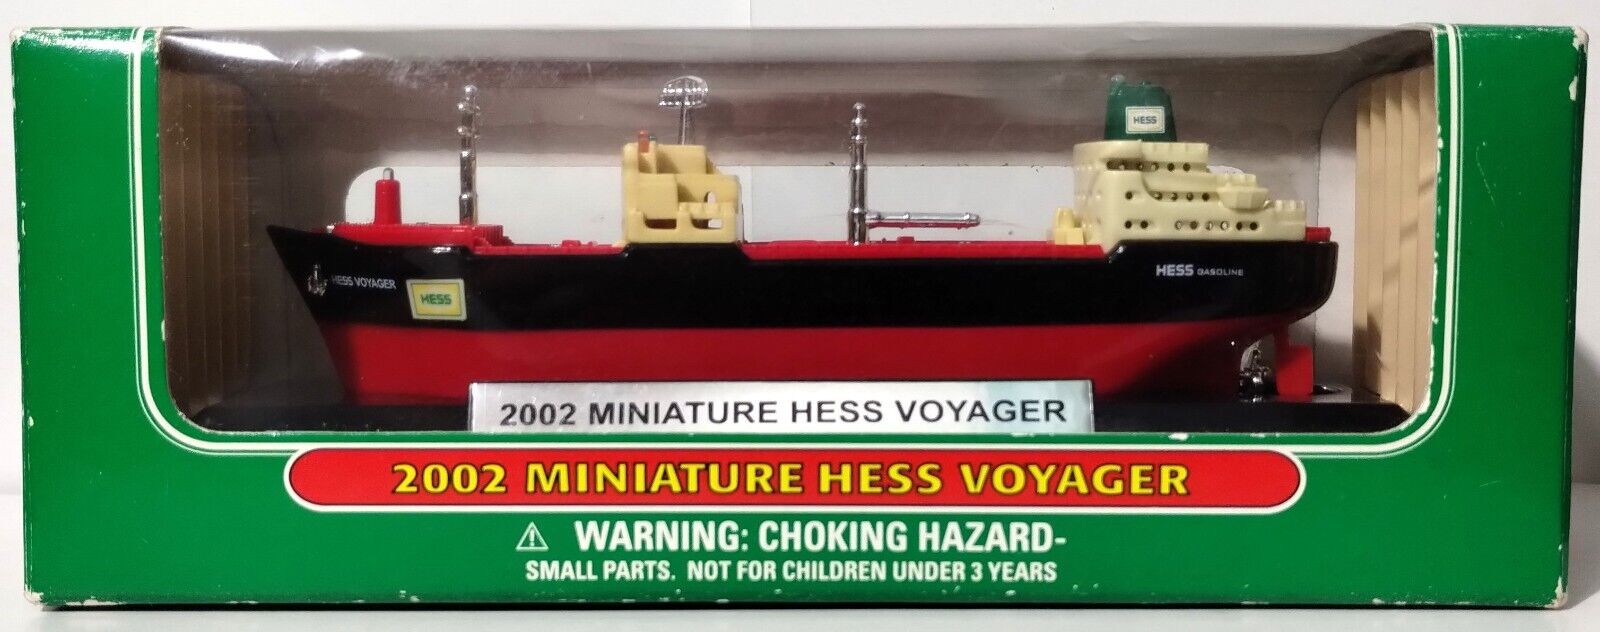 2002 Miniature Hess Voyager Oil Tanker Collectible Model - NIB